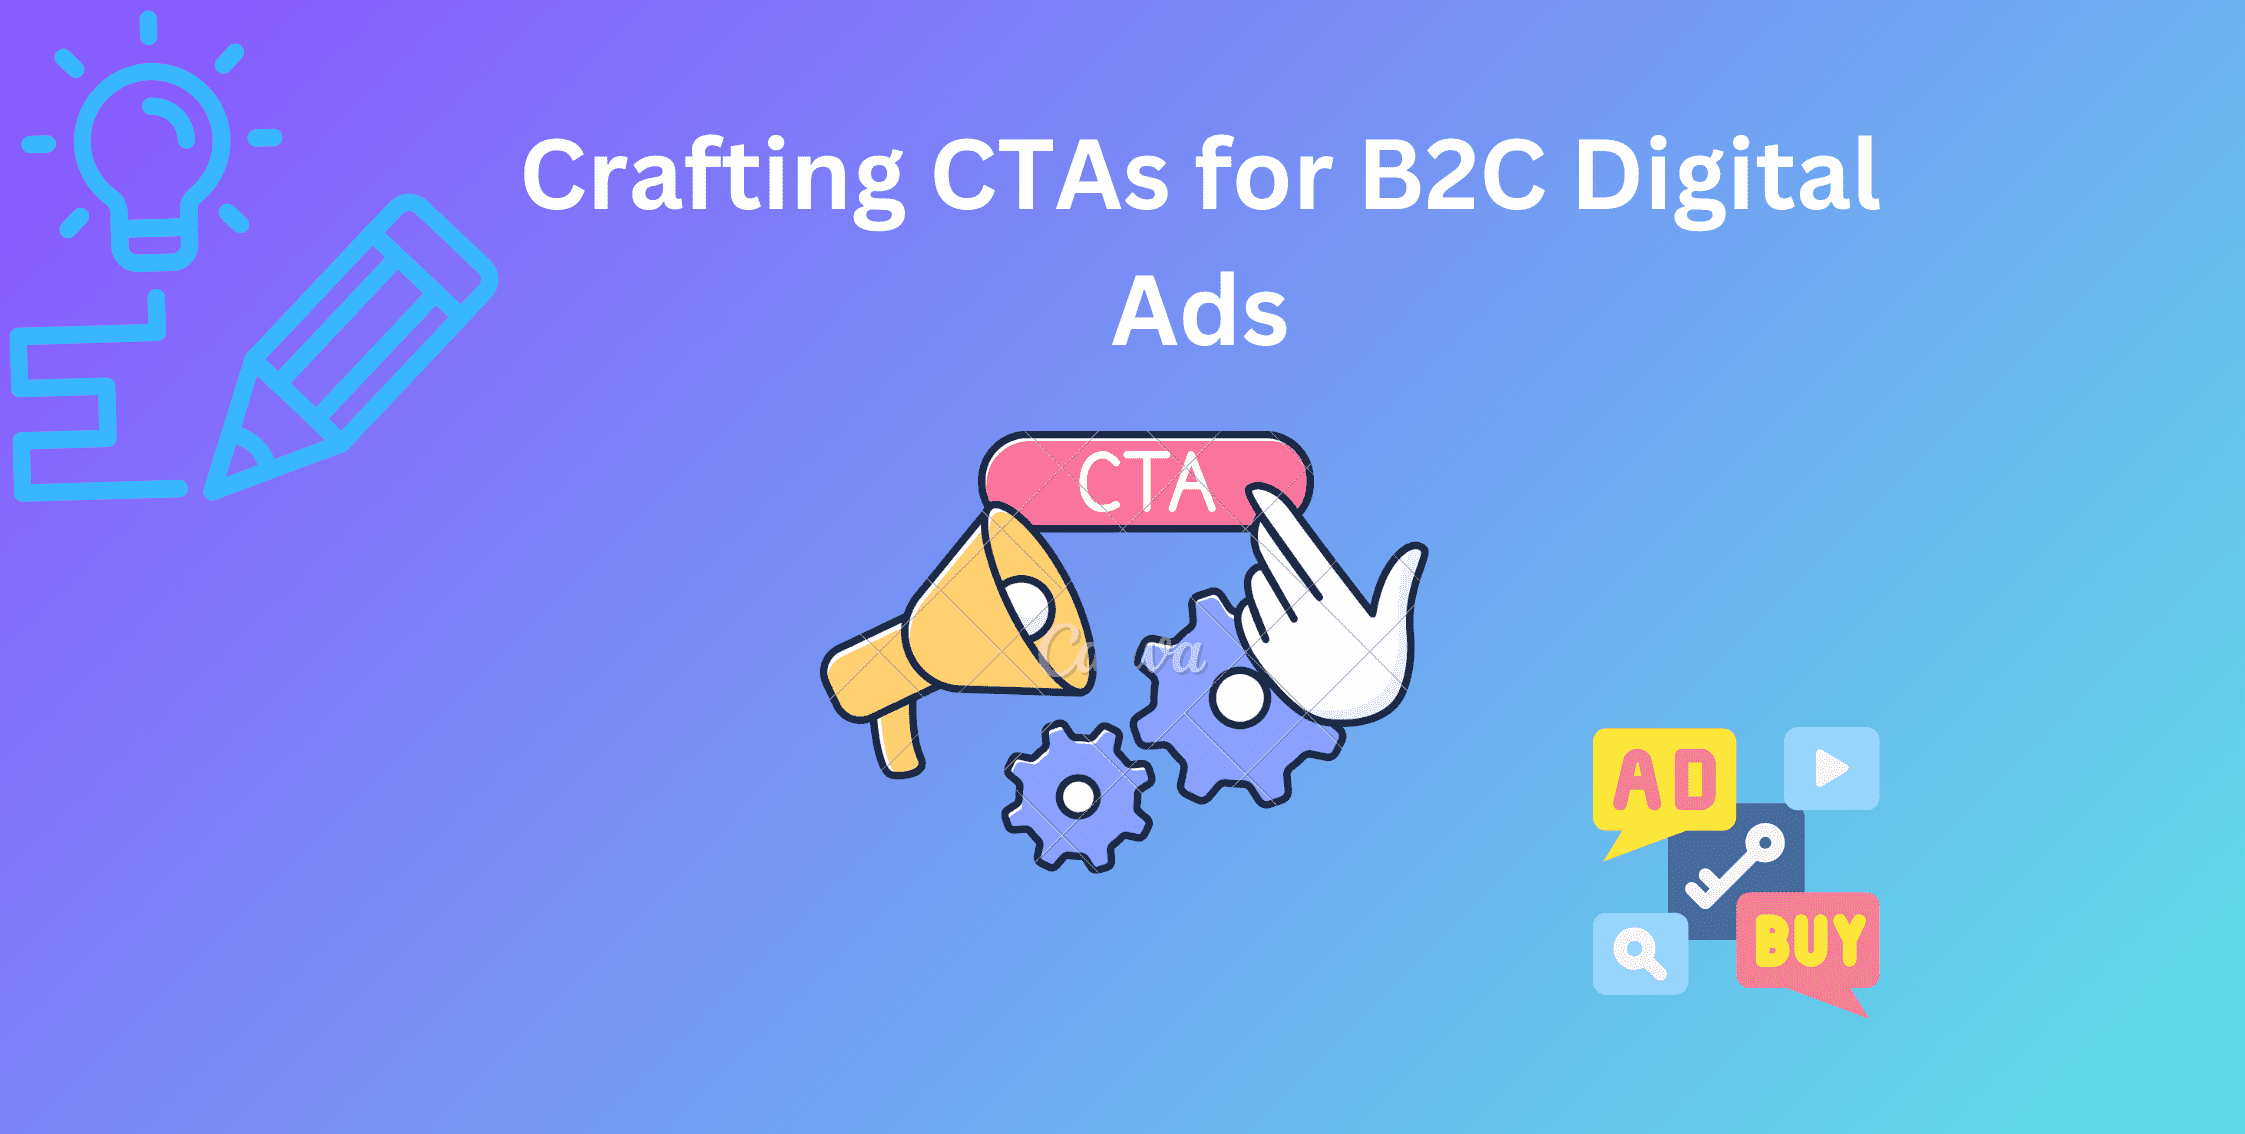 Crafting Effective Calls-to-Action for B2C Digital Ads